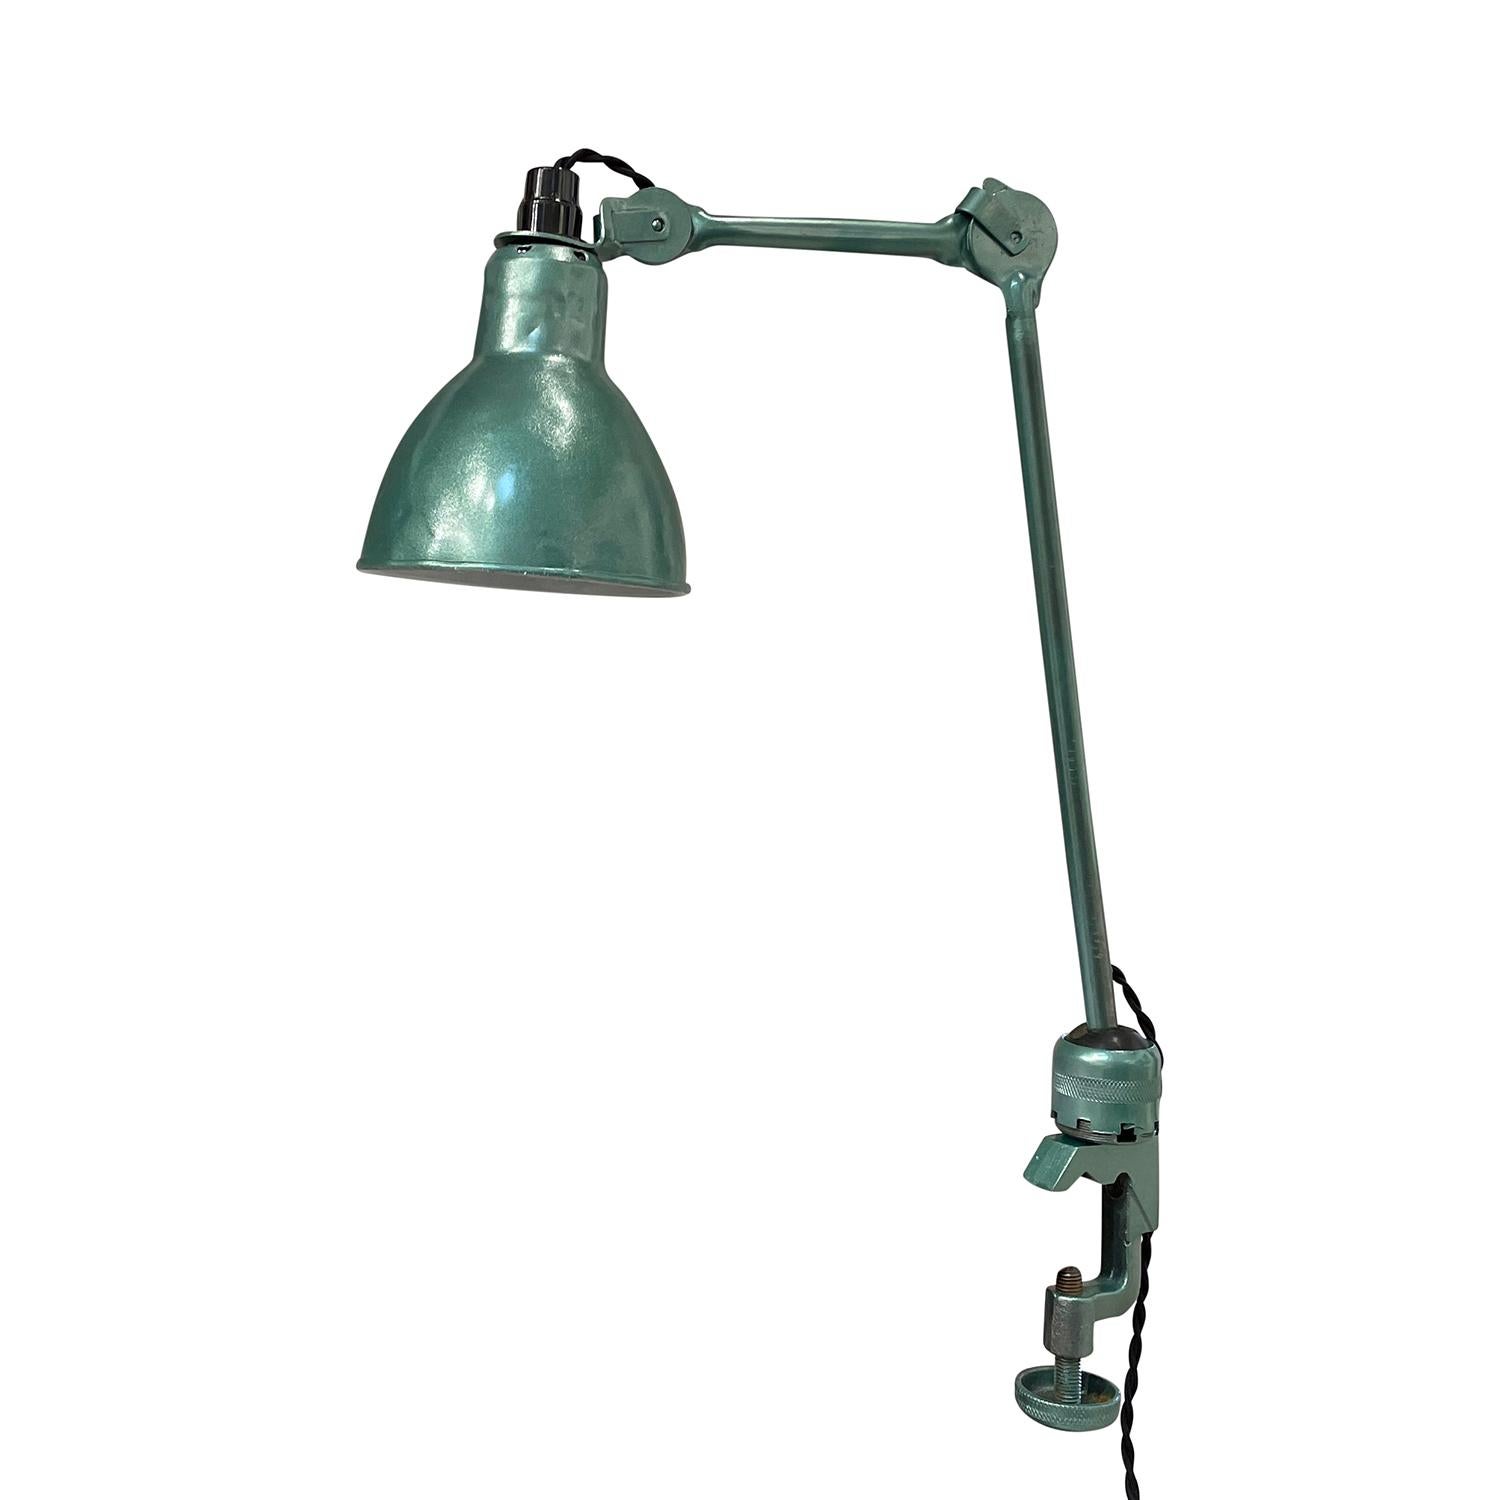 A light-green, vintage Art Deco French office, work light made of hand crafted metal, in good condition. The late industrial table, desk lamp is composed with two adjustable arms, featuring a one light socket. The wires have been renewed. Wear